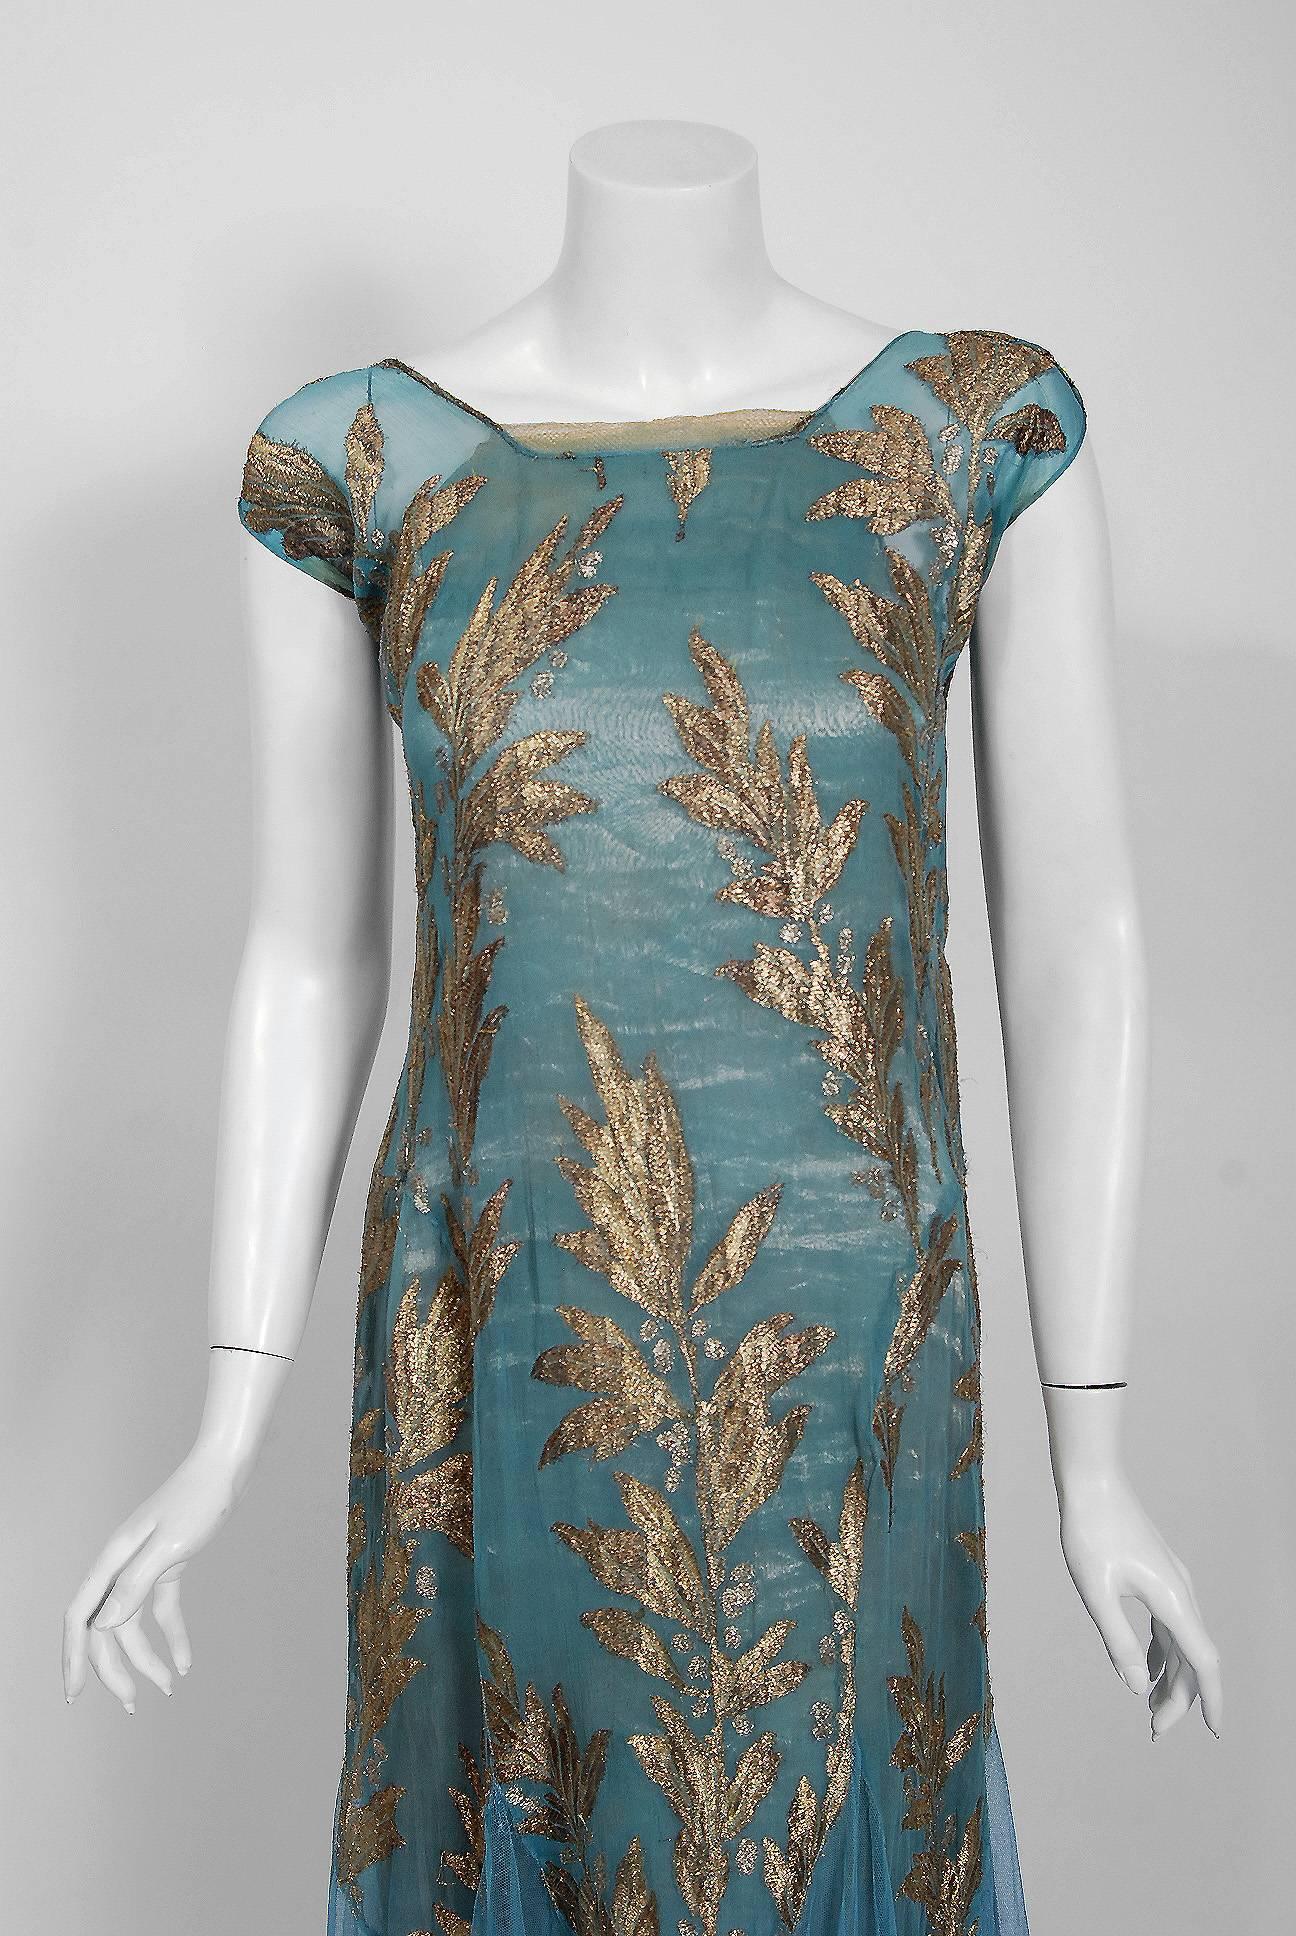 A breathtaking 1930's sky blue large-scale leaf motif garden gown from the Art-Deco era of glamour. The bodice has elegant cap-sleeves with chic back-bow. I adore the 3-dimensional feel of the luxurious layered lamé fabrics; so ahead of its time.